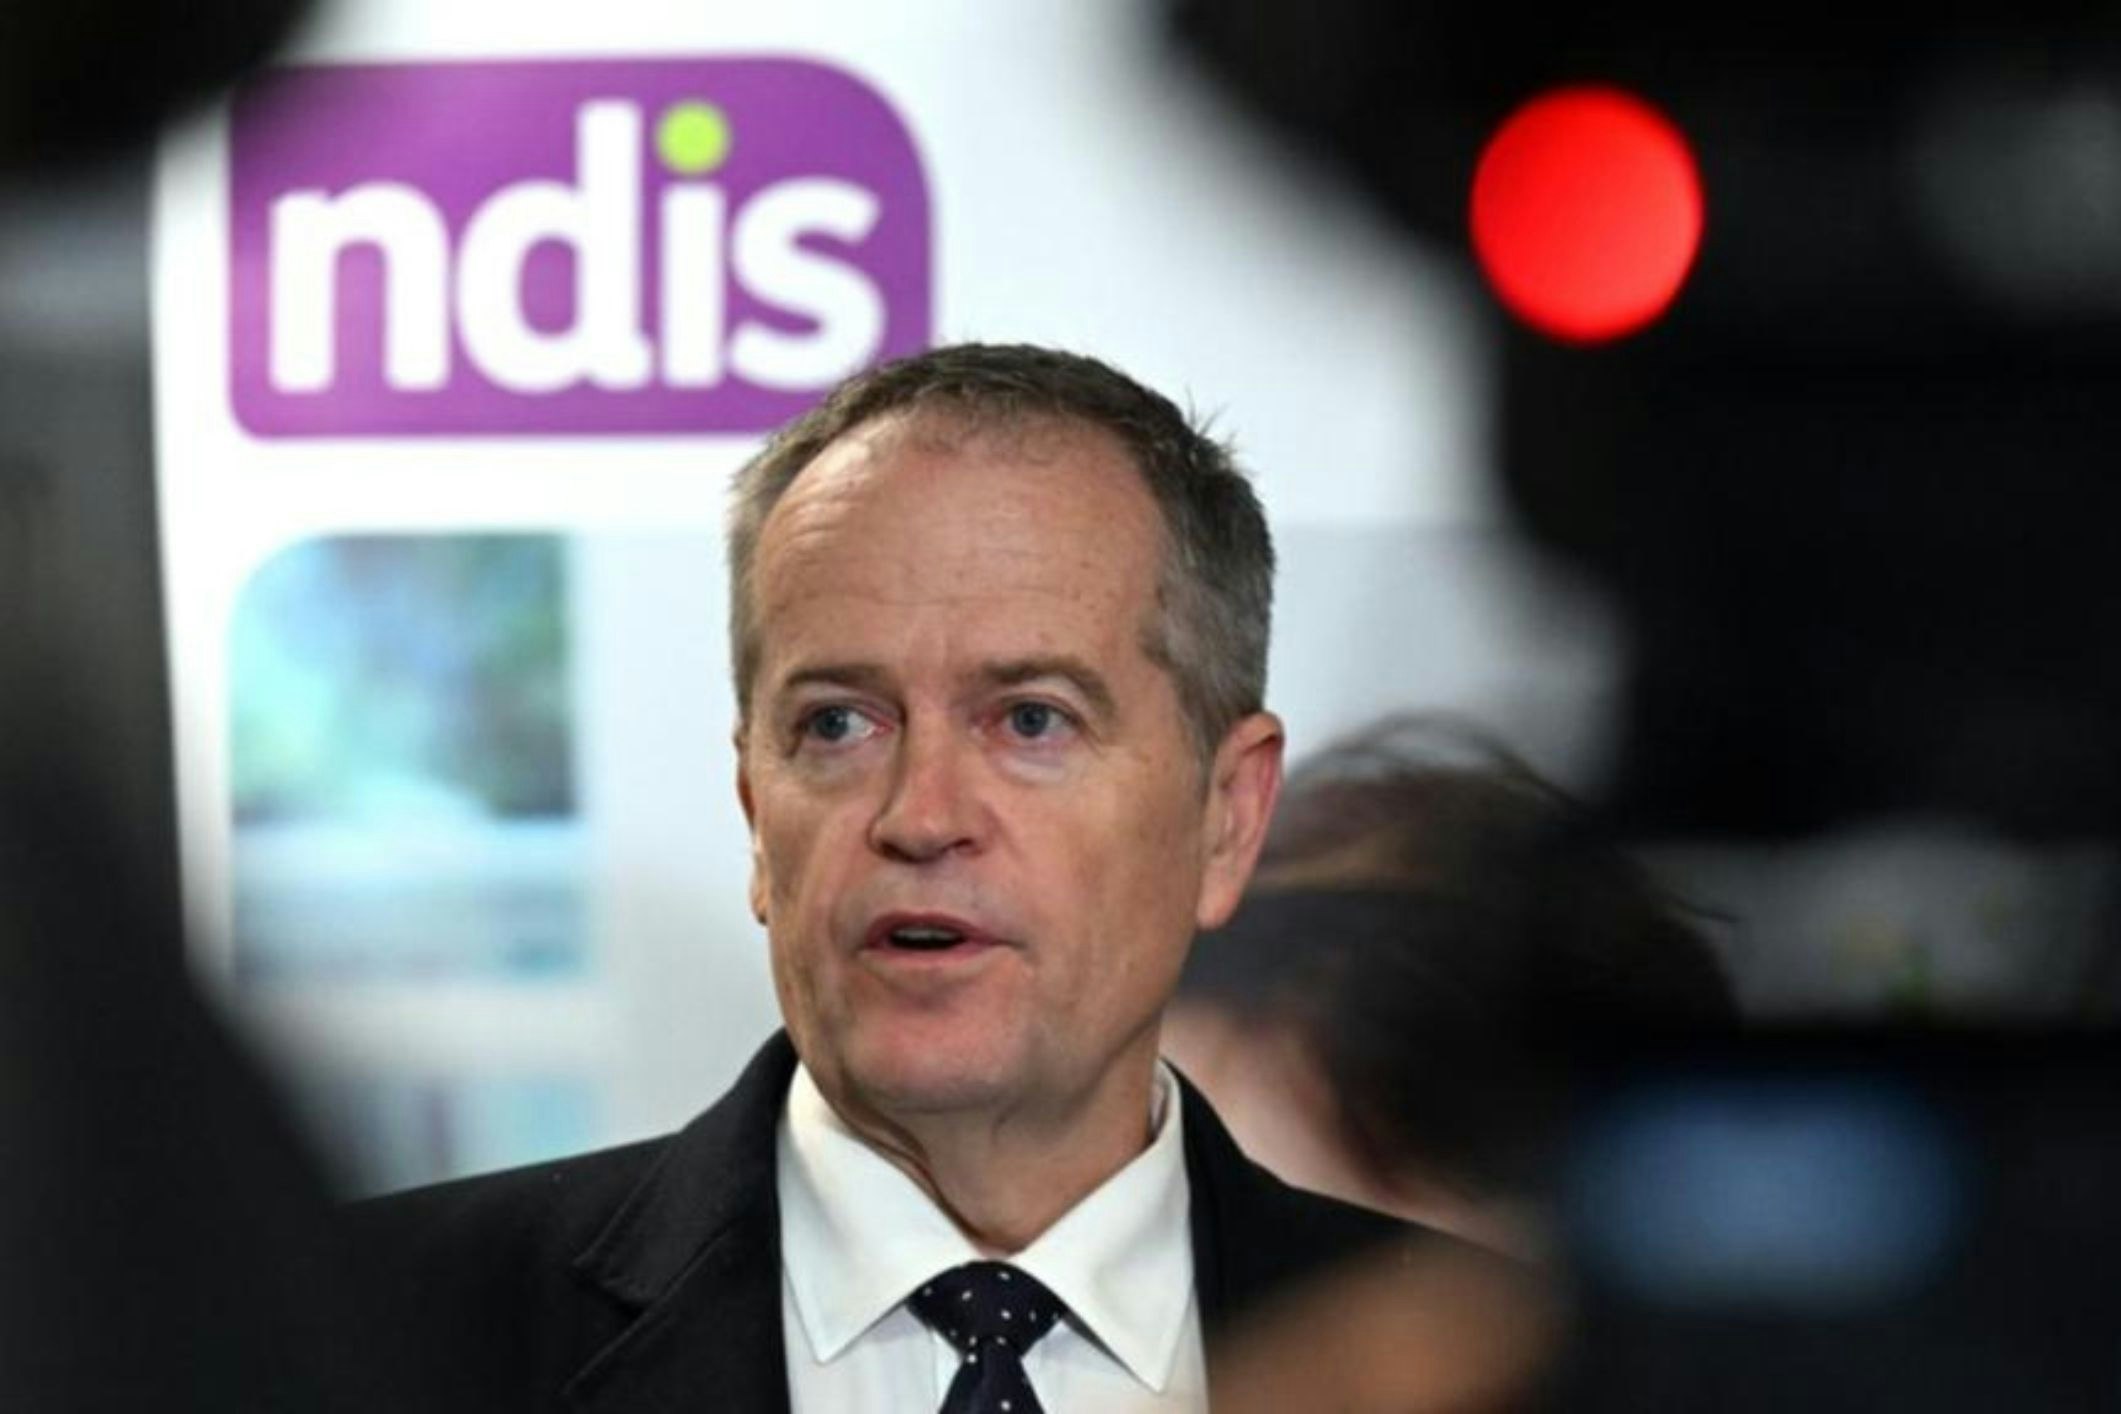 National Disability Insurance Scheme [NDIS] Minister Bill Shorten adamantly denounced support for attention-deficit hyperactivity disorder [ADHD] as a pathway to support through Government funds. [Image courtesy of Mick Tsikas via Australian Associated Press]
